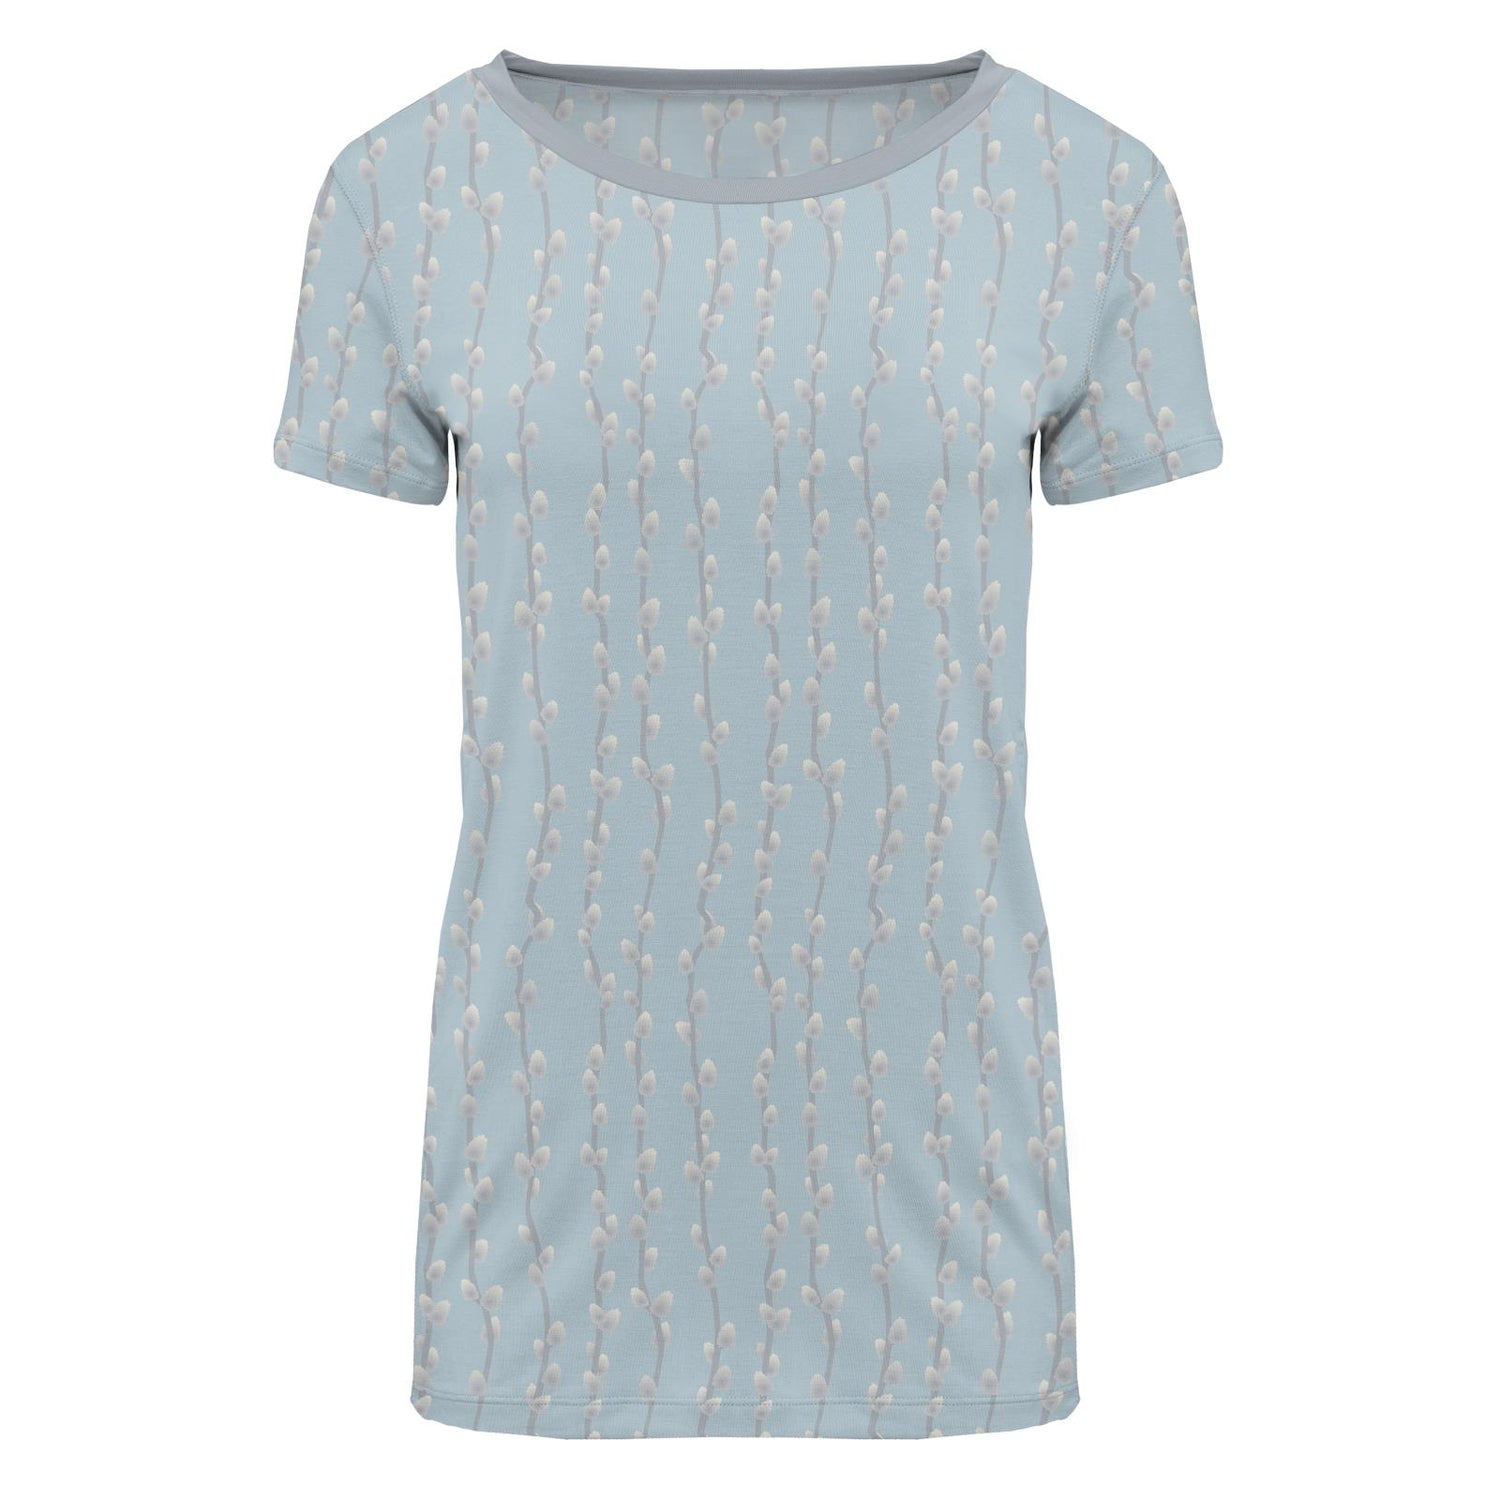 Women's Print Short Sleeve Loosey Goosey Tee in Spring Sky Pussy Willows